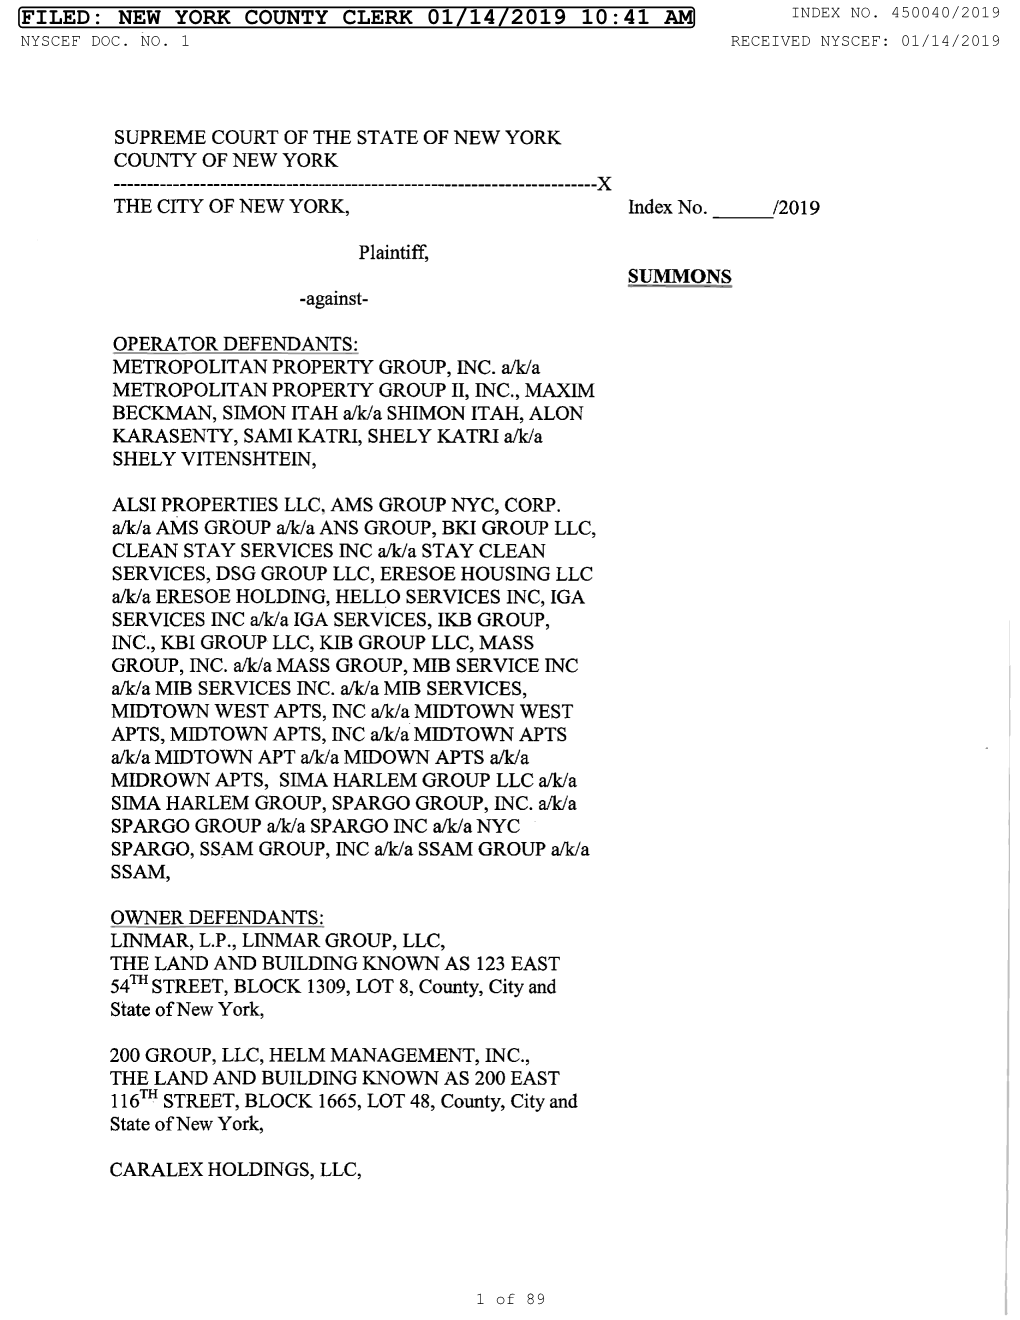 Filed: New York County Clerk 01/14/2019 10:41 Am Index No